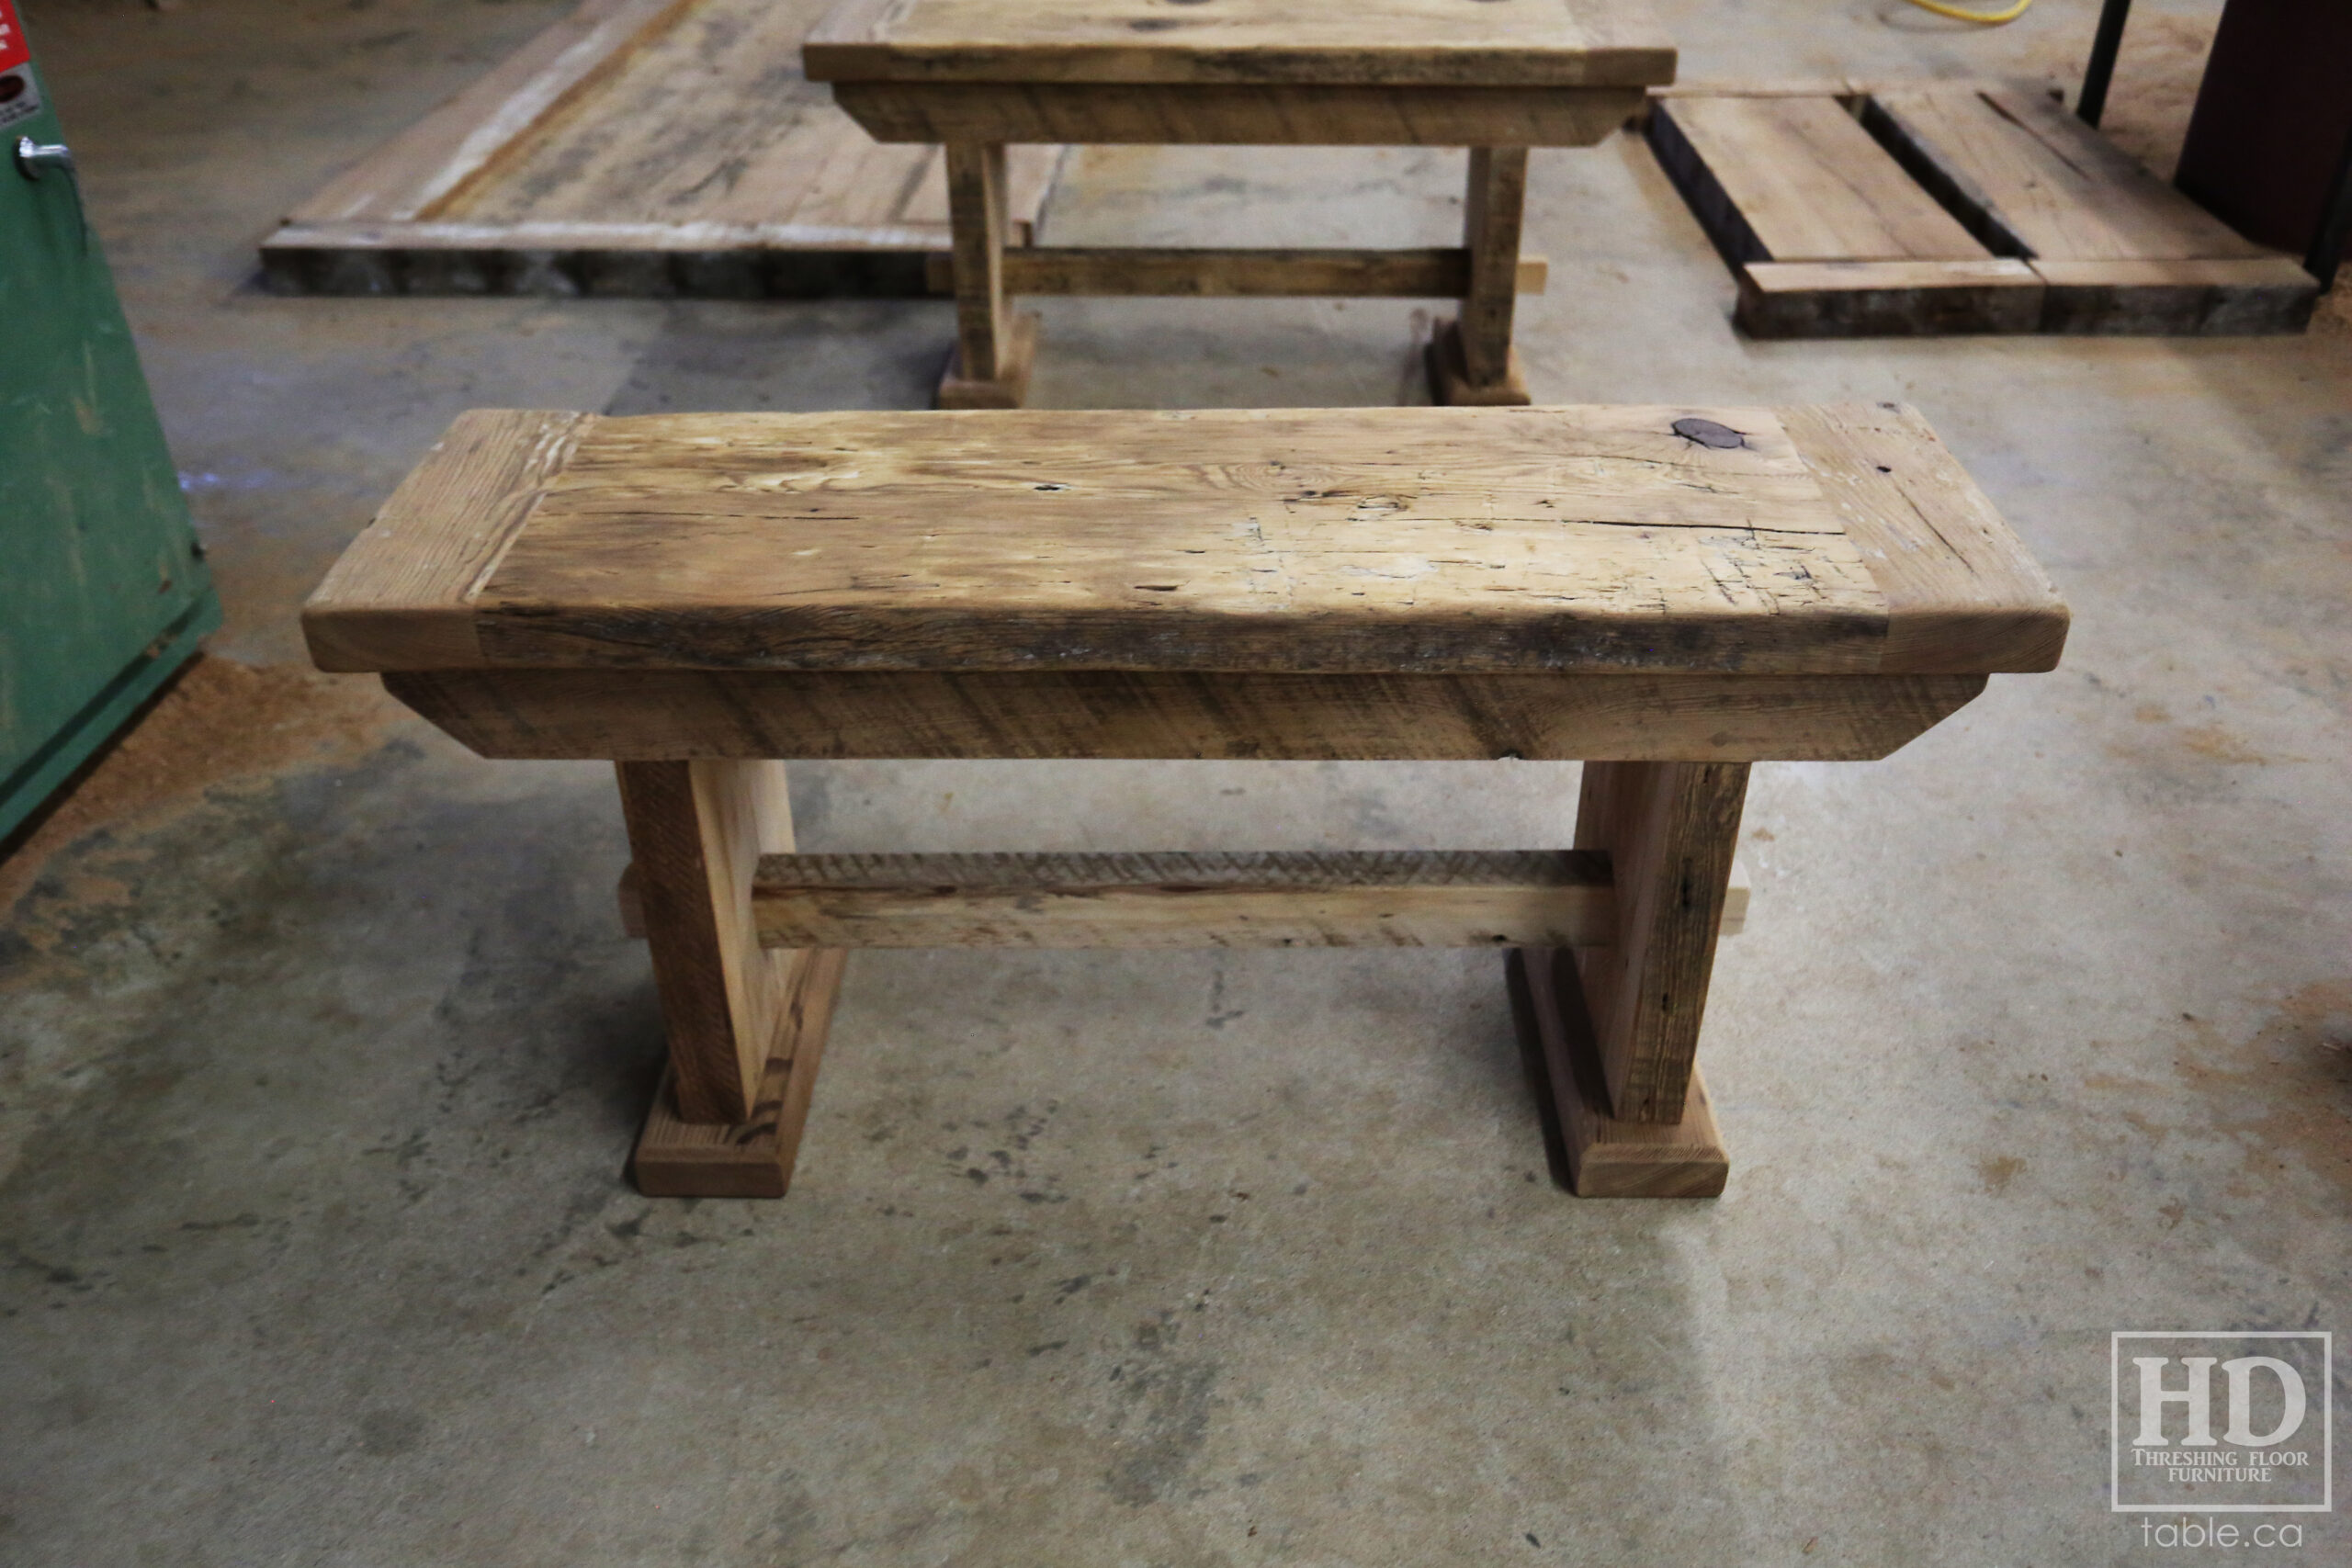 6.5' Reclaimed Sawbuck Table we made for an Orangeville Home - 42" wide - Ontario Barnwood Old Growth Hemlock Threshing Floor Construction - Original edges & distressing maintained - Premium epoxy + matte polyurethane finish - [2] Matching Reclaimed Wood Benches / Trestle Base - [6] Plank Back Chairs / Wormy Maple - Stained Colour of Table / Polyurethane clearcoat finish - www.table.ca